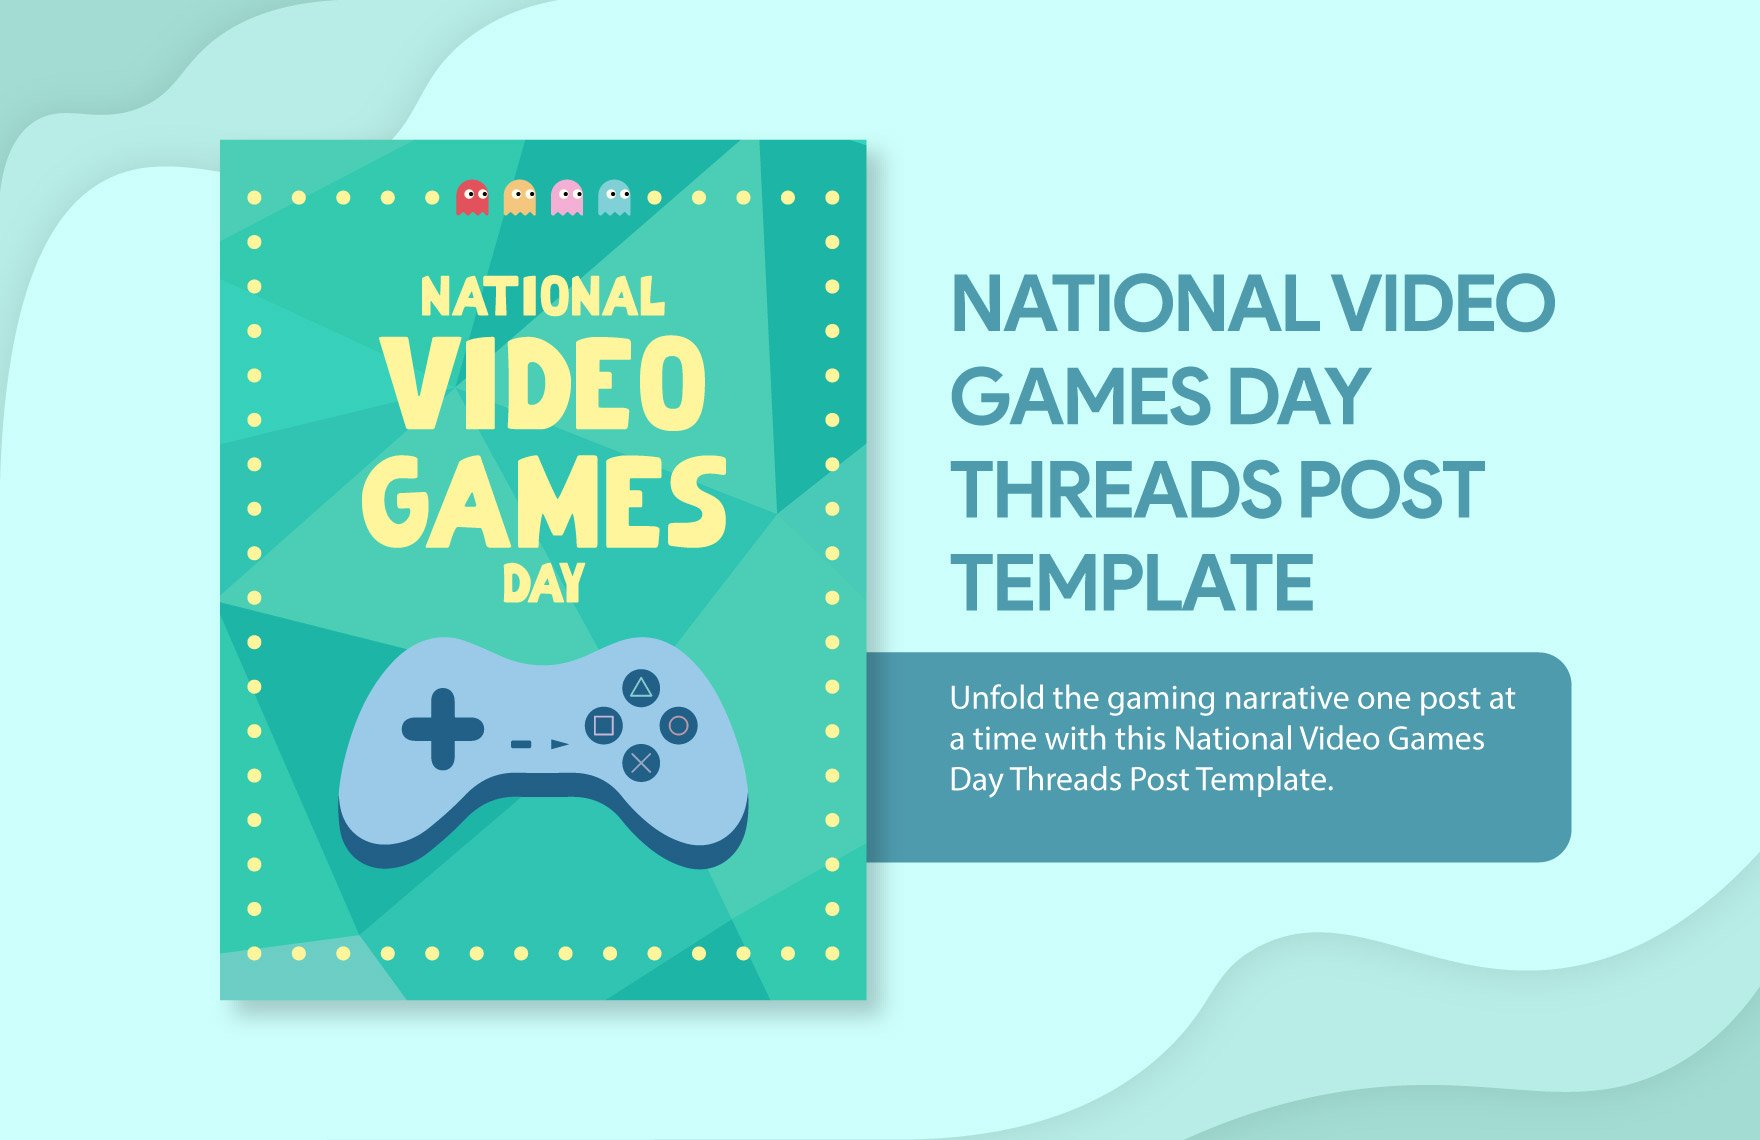 Free National Video Games Day Threads Post Template in Illustrator, PSD, PNG